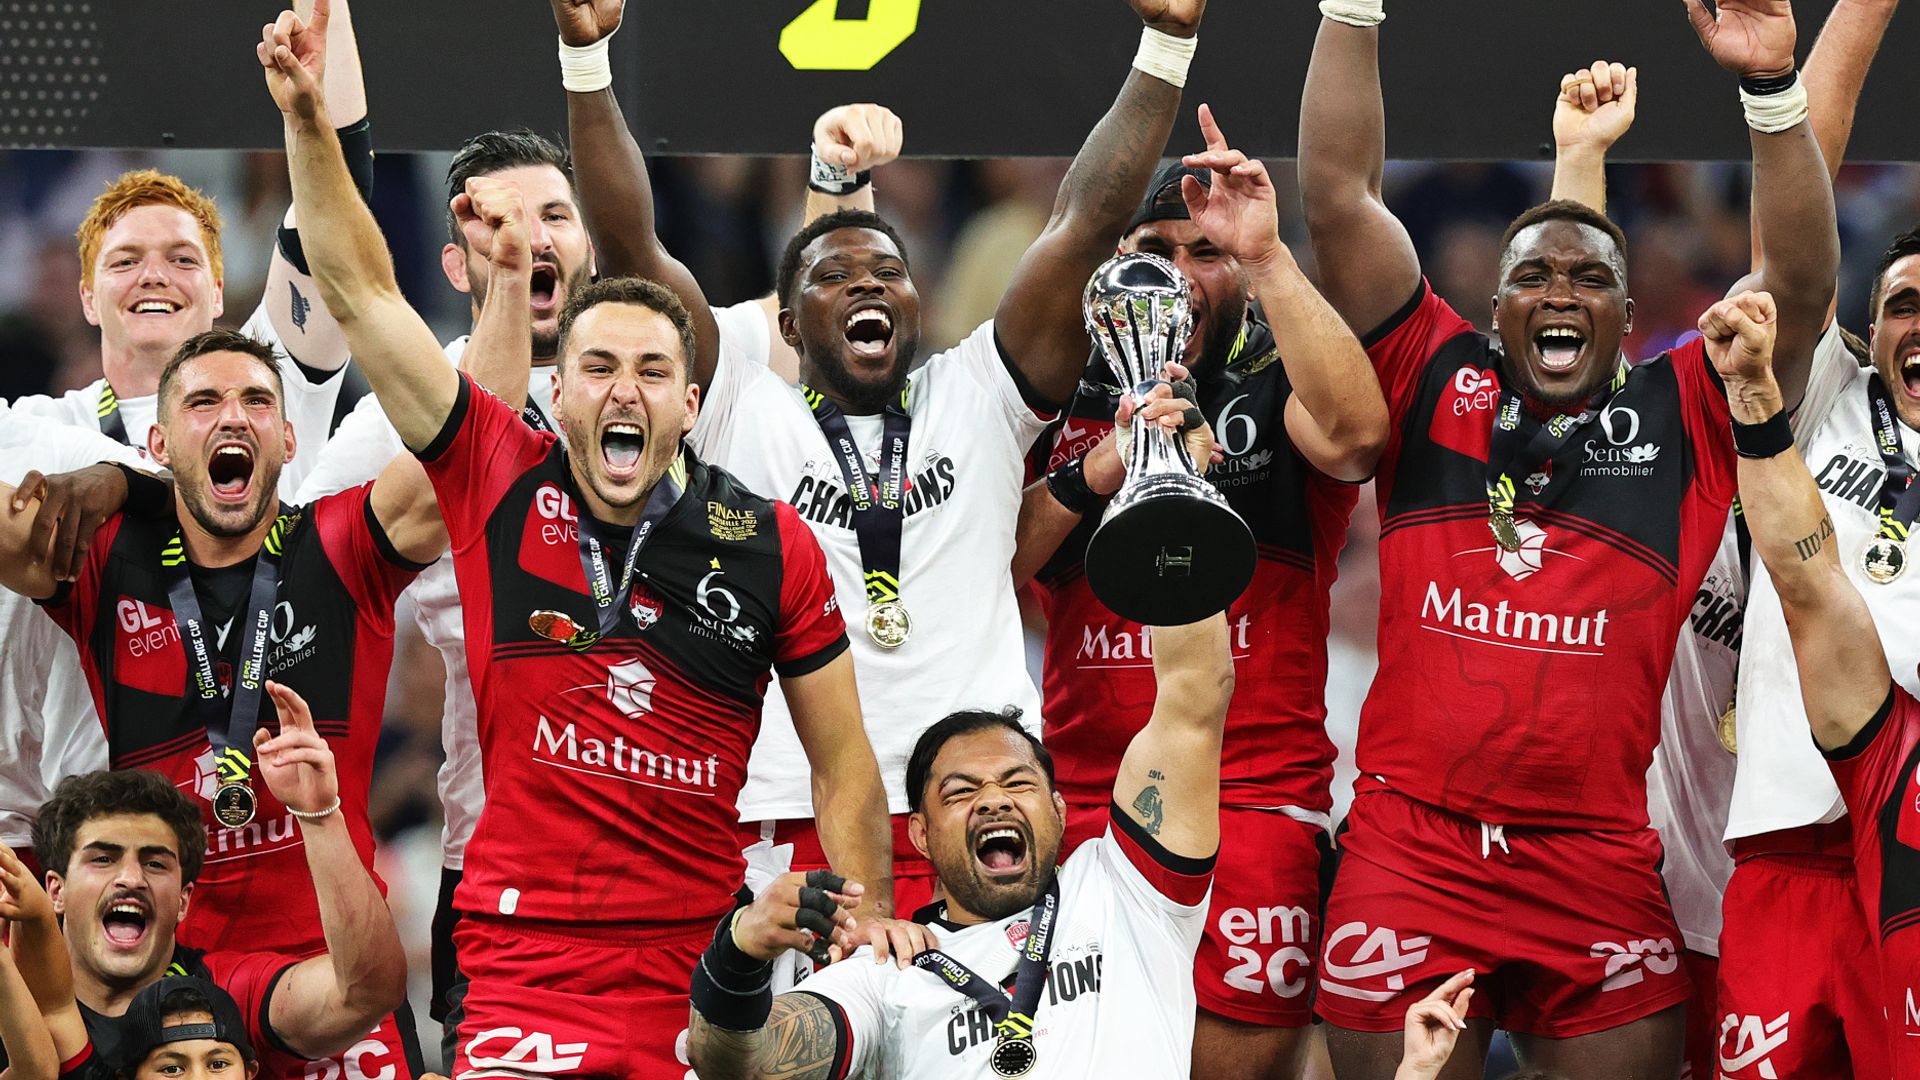 Lyon beat Toulon to claim Challenge Cup and first title since 1933